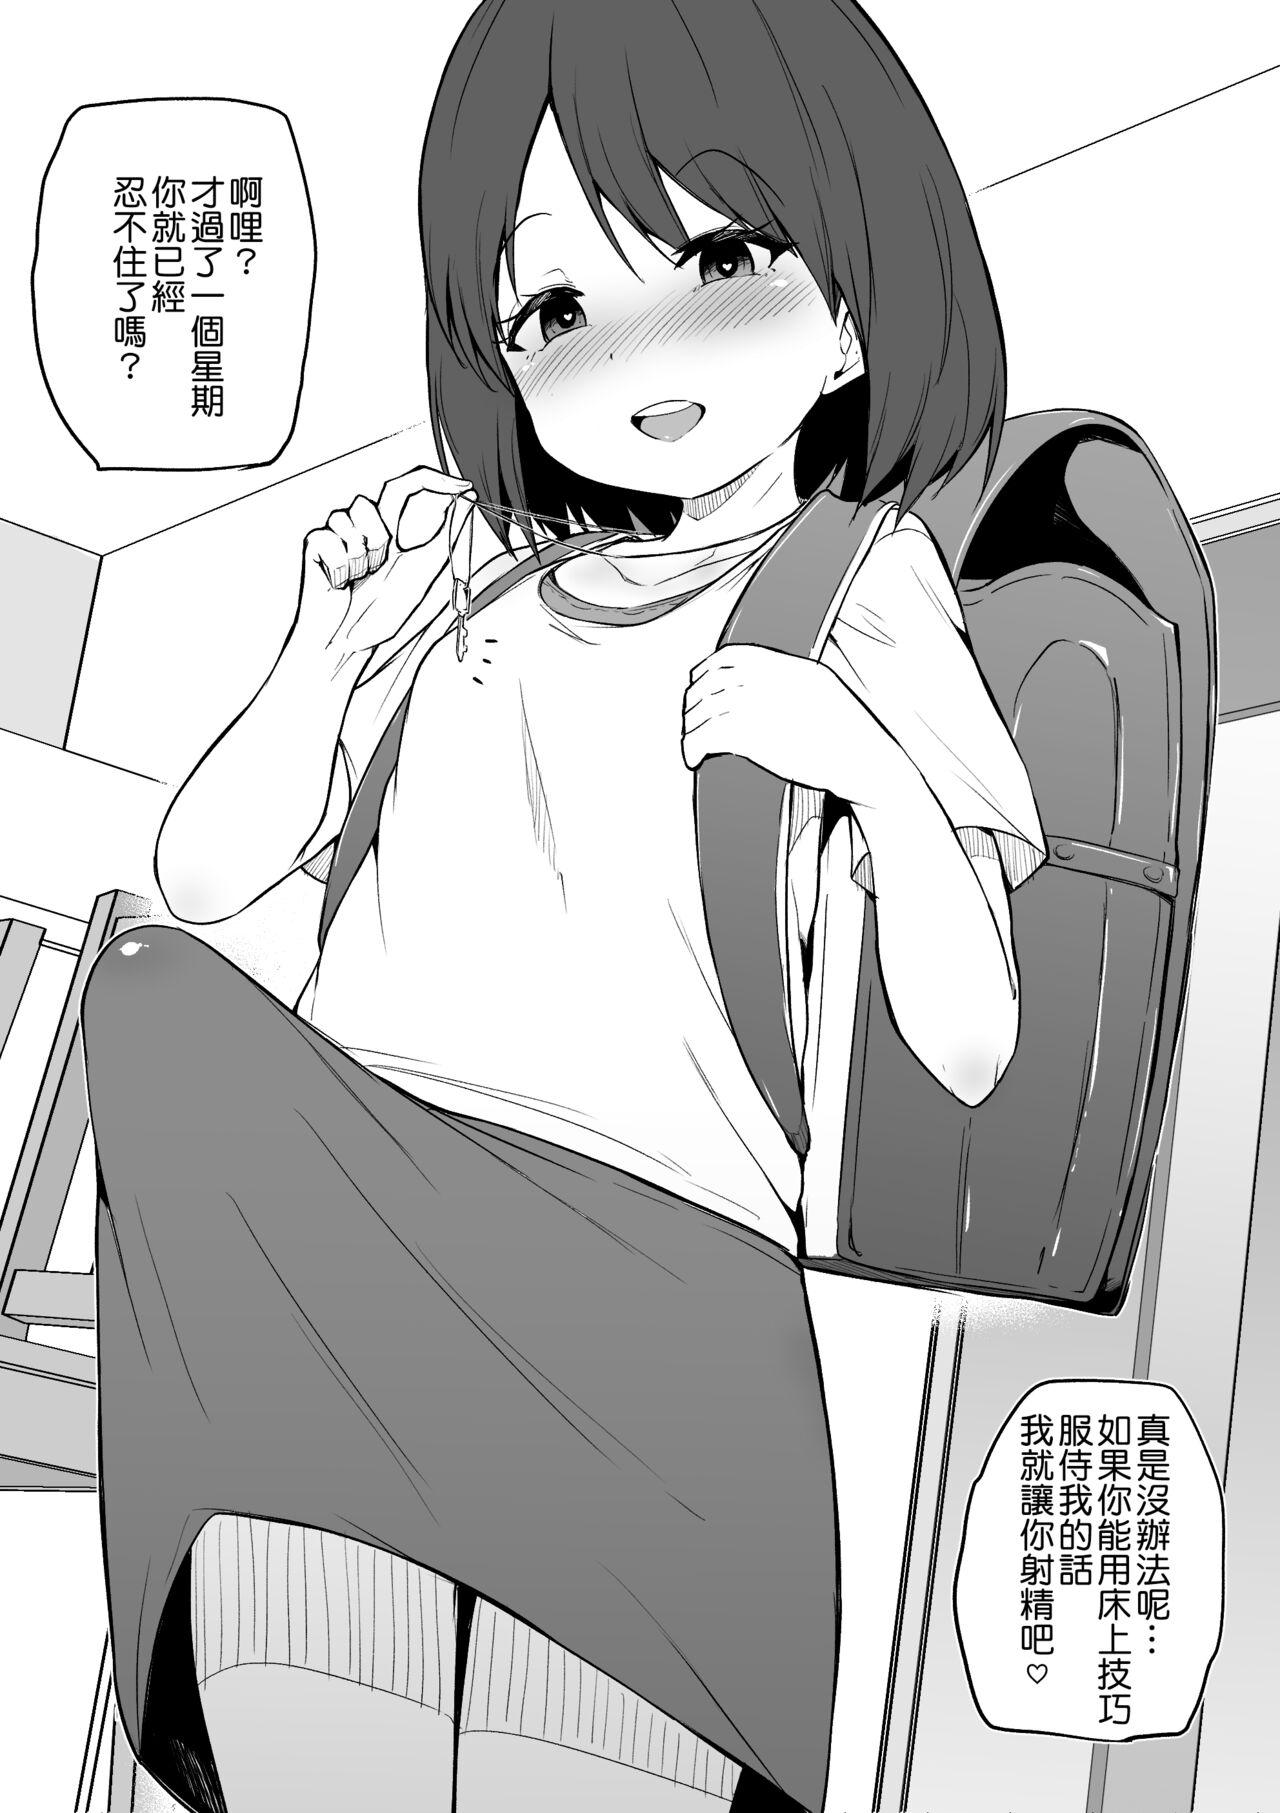 Free 18 Year Old Porn [Makin] Pixiv Single Page Manga Collection (2023 Jan - 2023 July) | 單頁漫畫合集(2023年1月~2023年7月) [Kokodone个人汉化] - Touhou project Spy x family Gay Brownhair - Picture 2